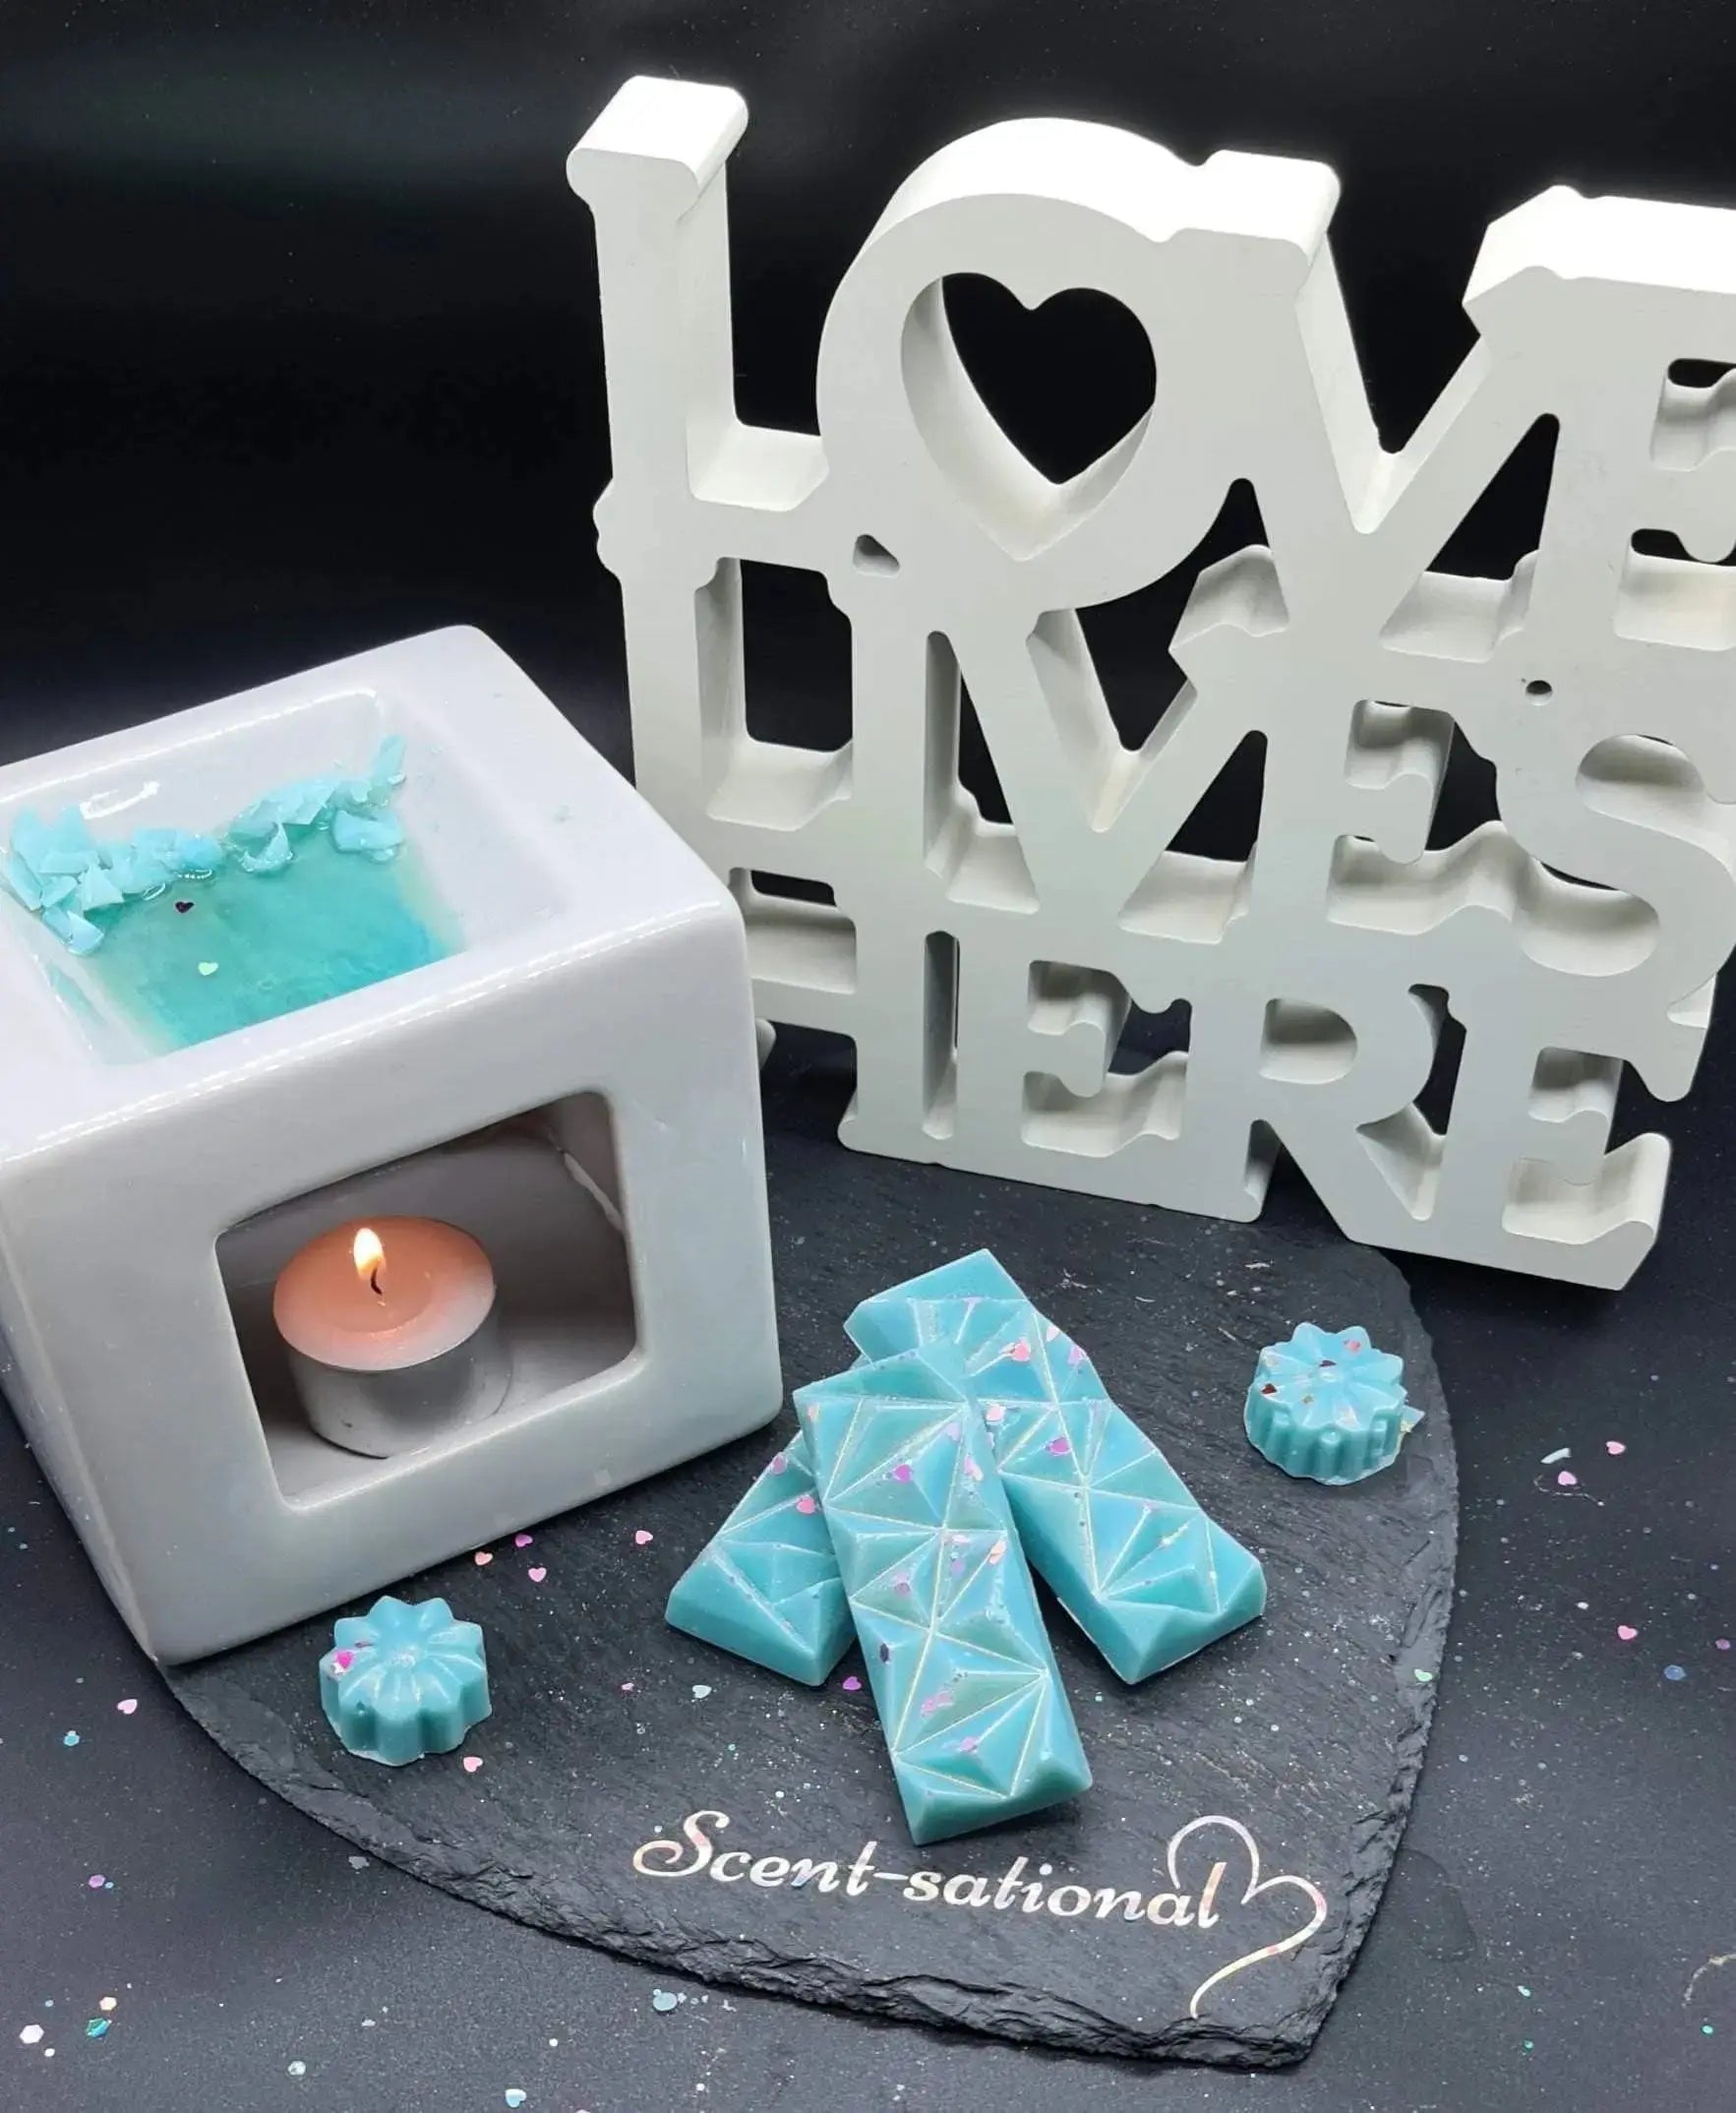 A Thousand Wishes Wax Melts Scent Sational Wax melts